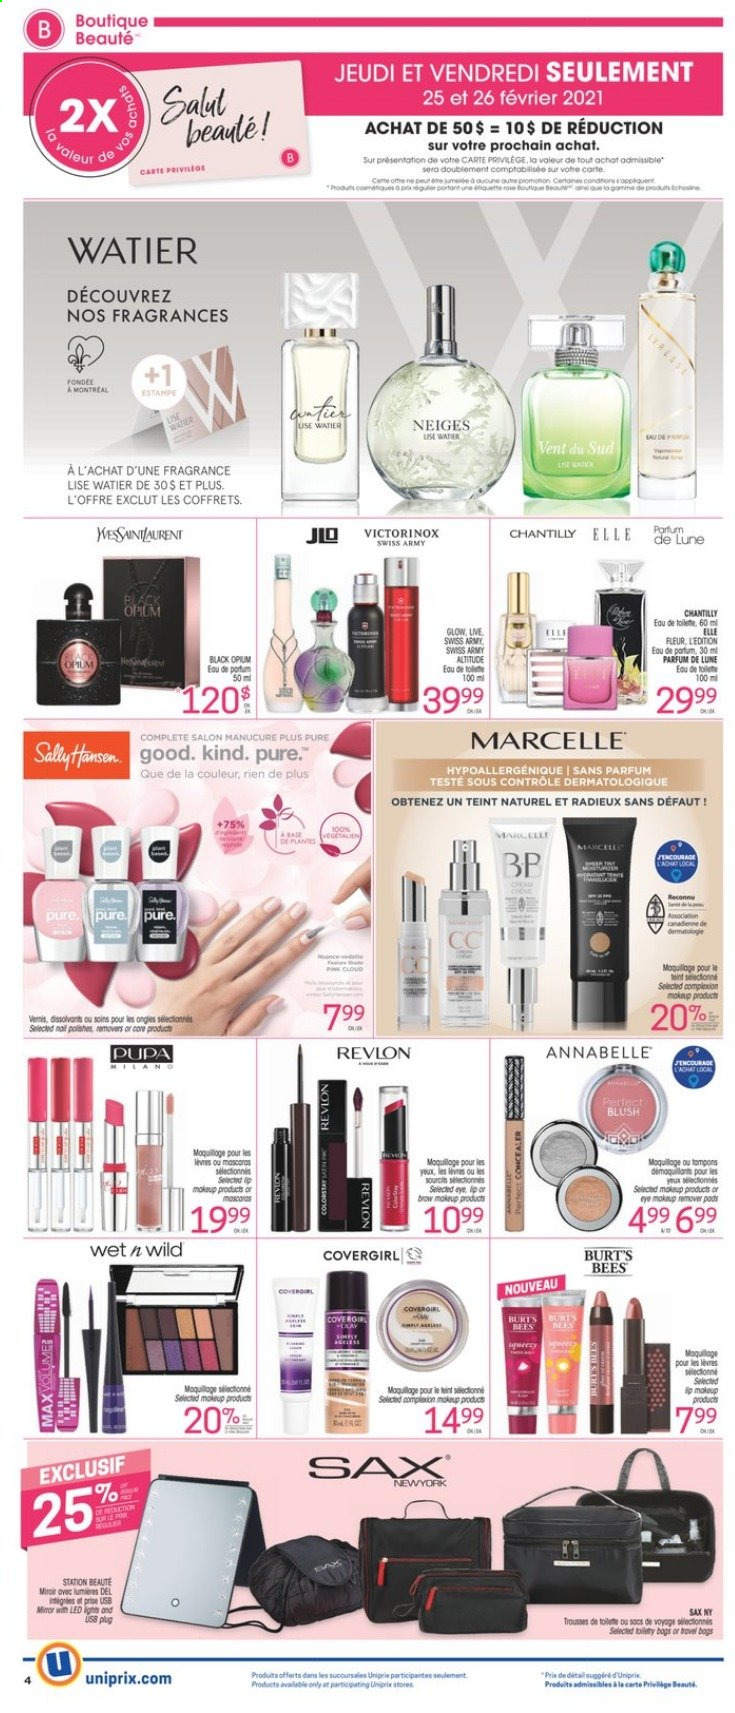 thumbnail - Uniprix Flyer - February 25, 2021 - March 03, 2021 - Sales products - L'Or, Olay, Revlon, fragrance, Sure. Page 4.